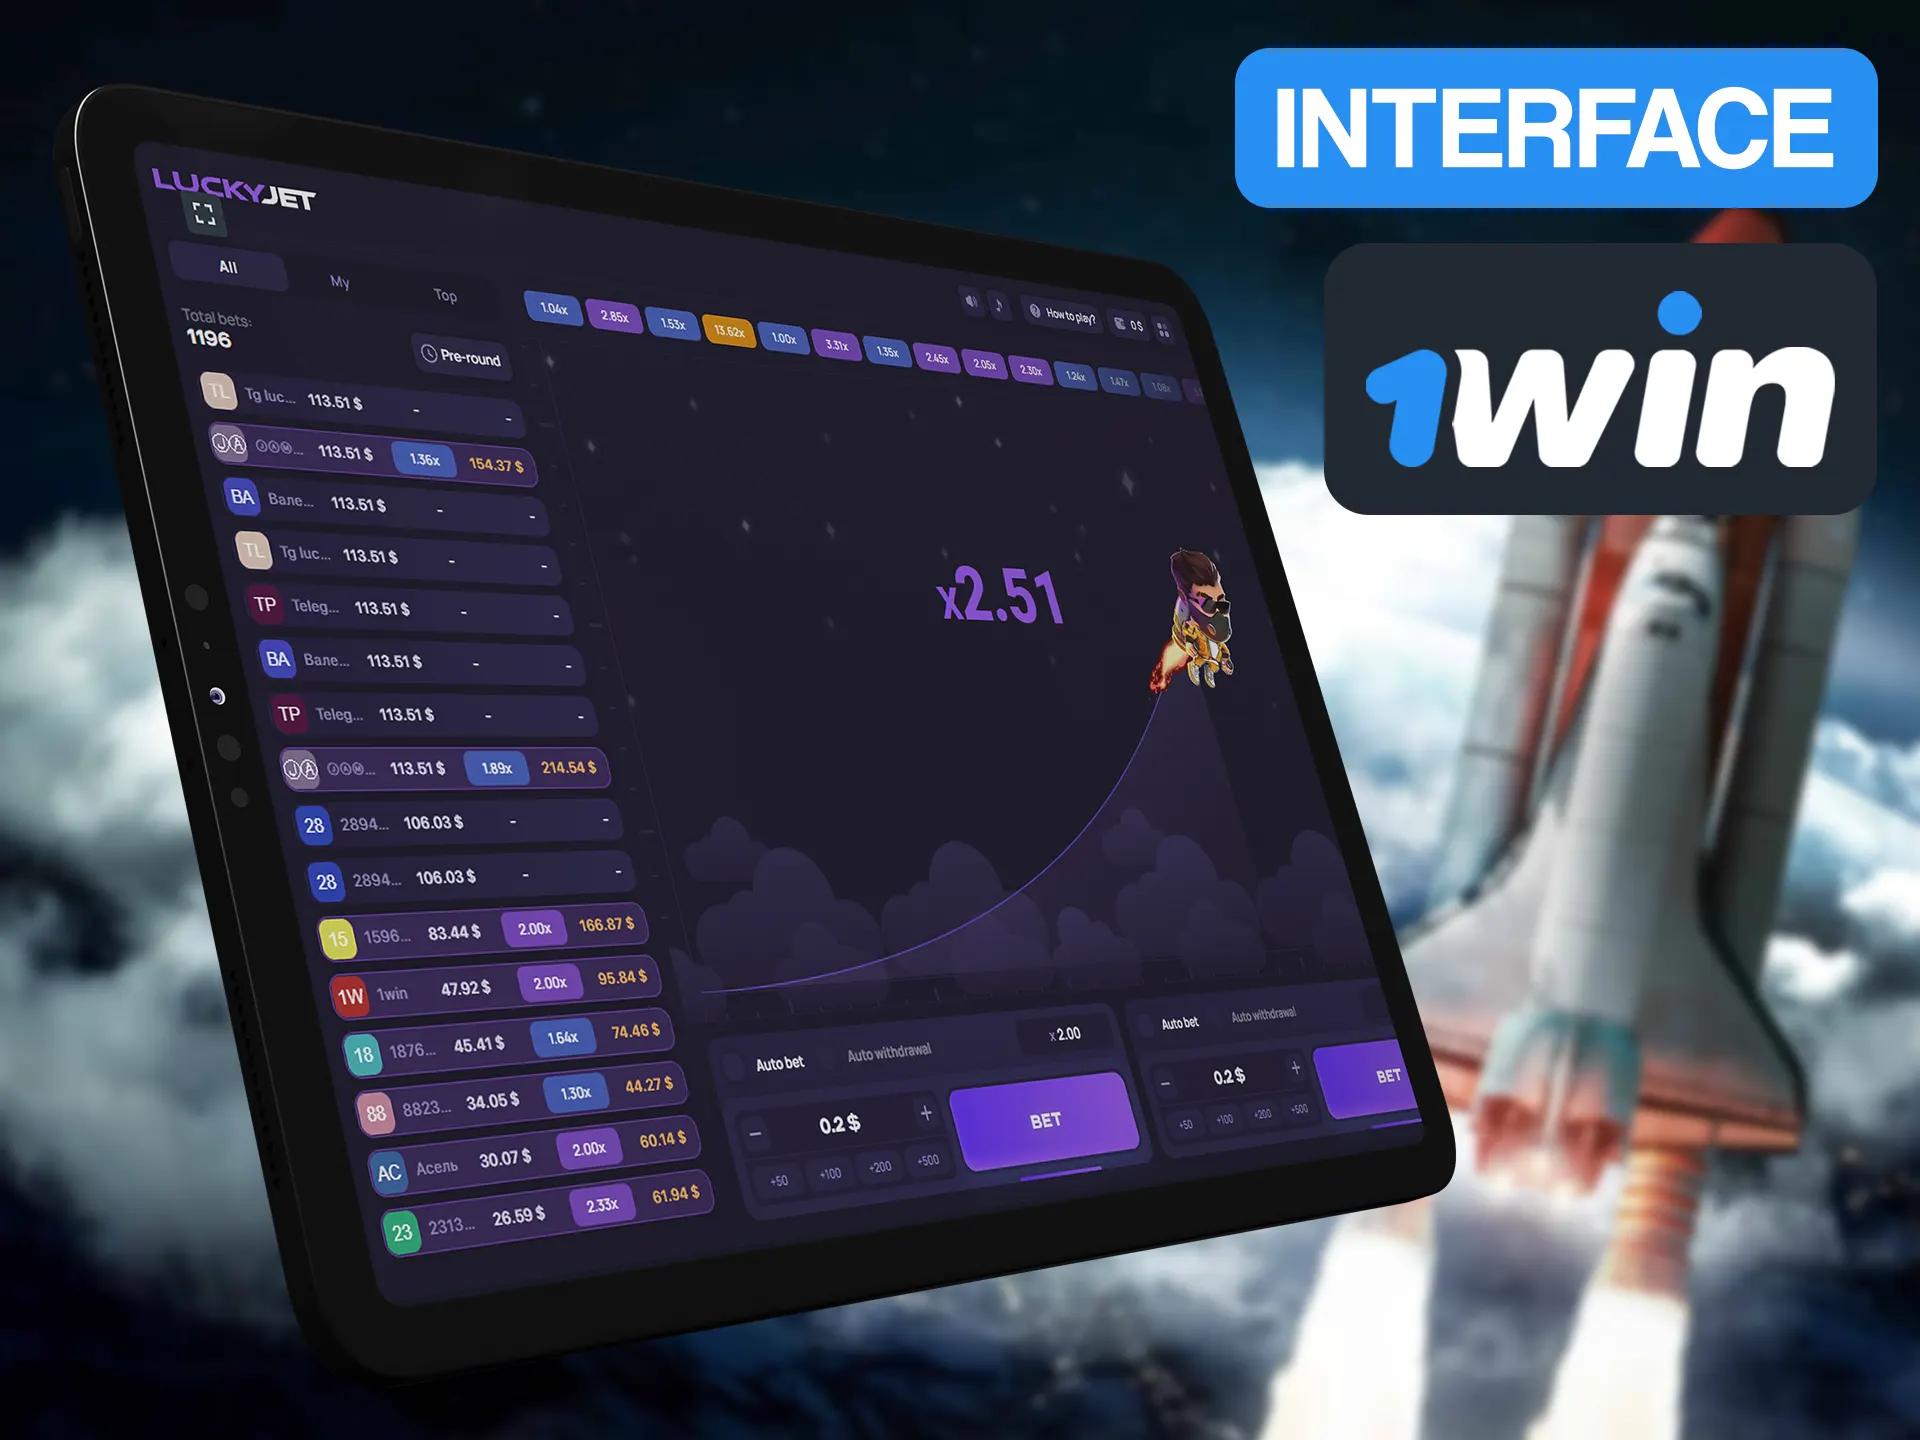 Learn more new features in 1win Lucky Jet.